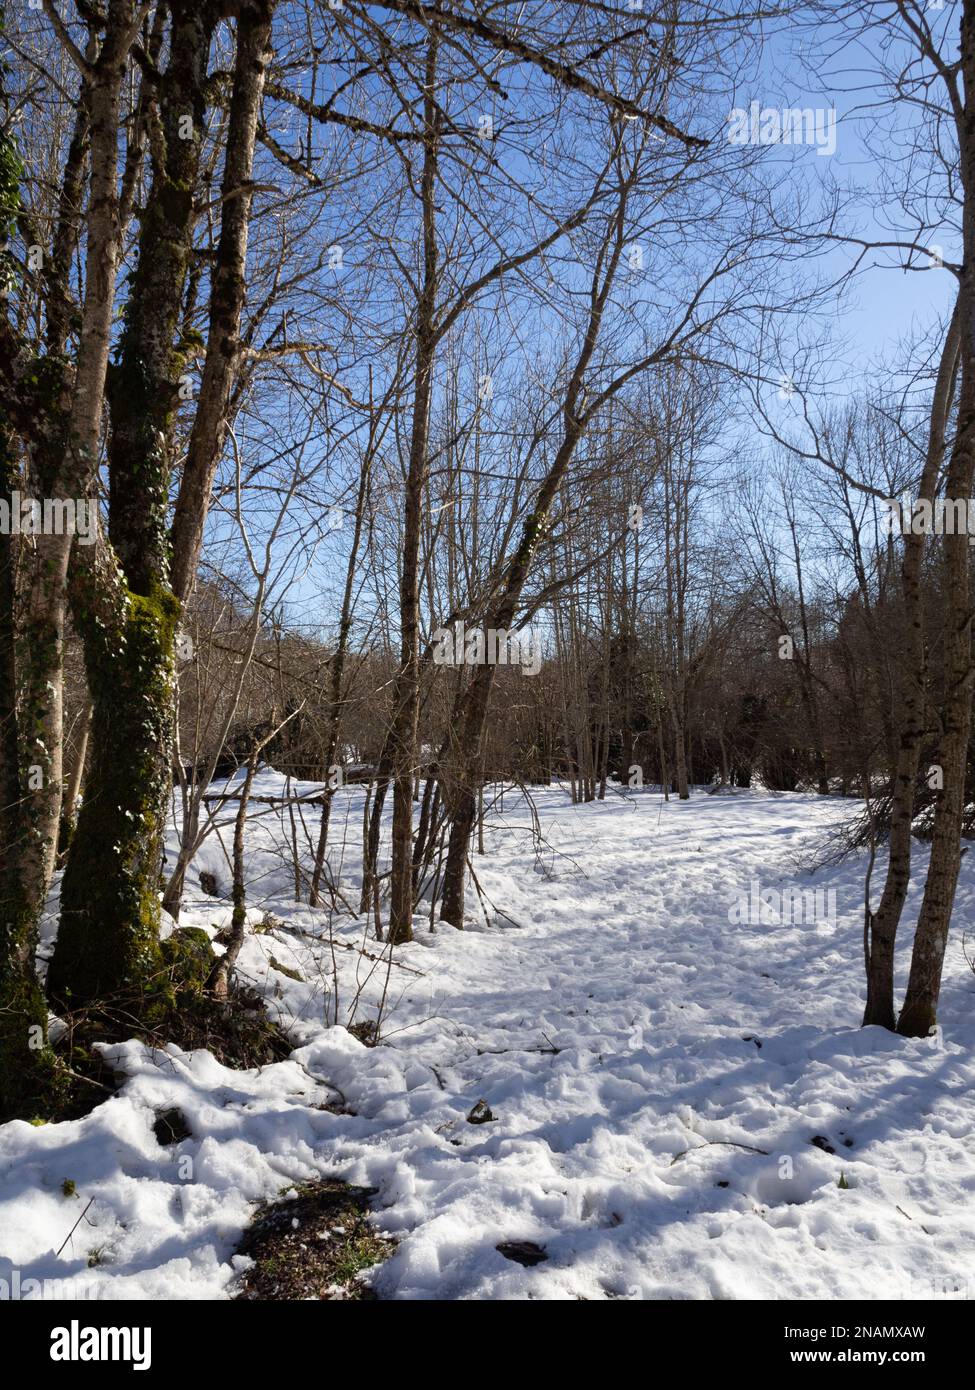 Snowfall in the forest in spain Stock Photo